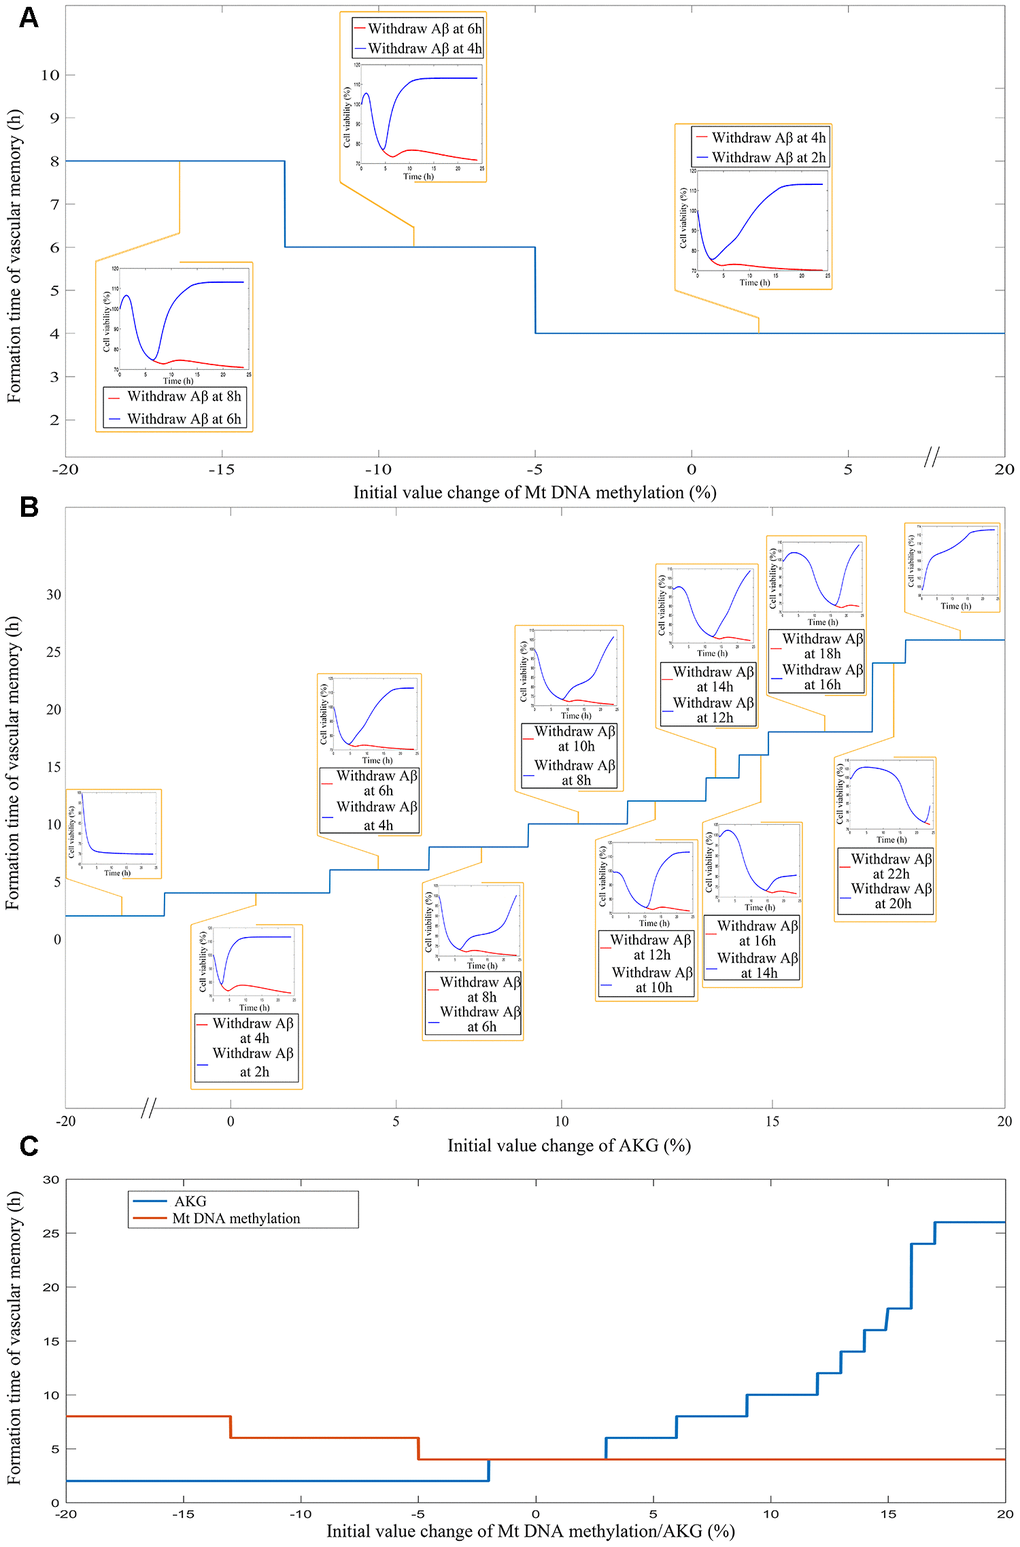 (A) The impact of different levels of mtDNA methylation on the cerebrovascular endothelial cell damage memory formation time. (B) The impact of different levels of AKG on the cerebrovascular endothelial cell damage memory formation time. (C) The summary plot of the impact of different levels of mtDNA methylation and AKG on the cerebrovascular endothelial cell damage memory formation time.